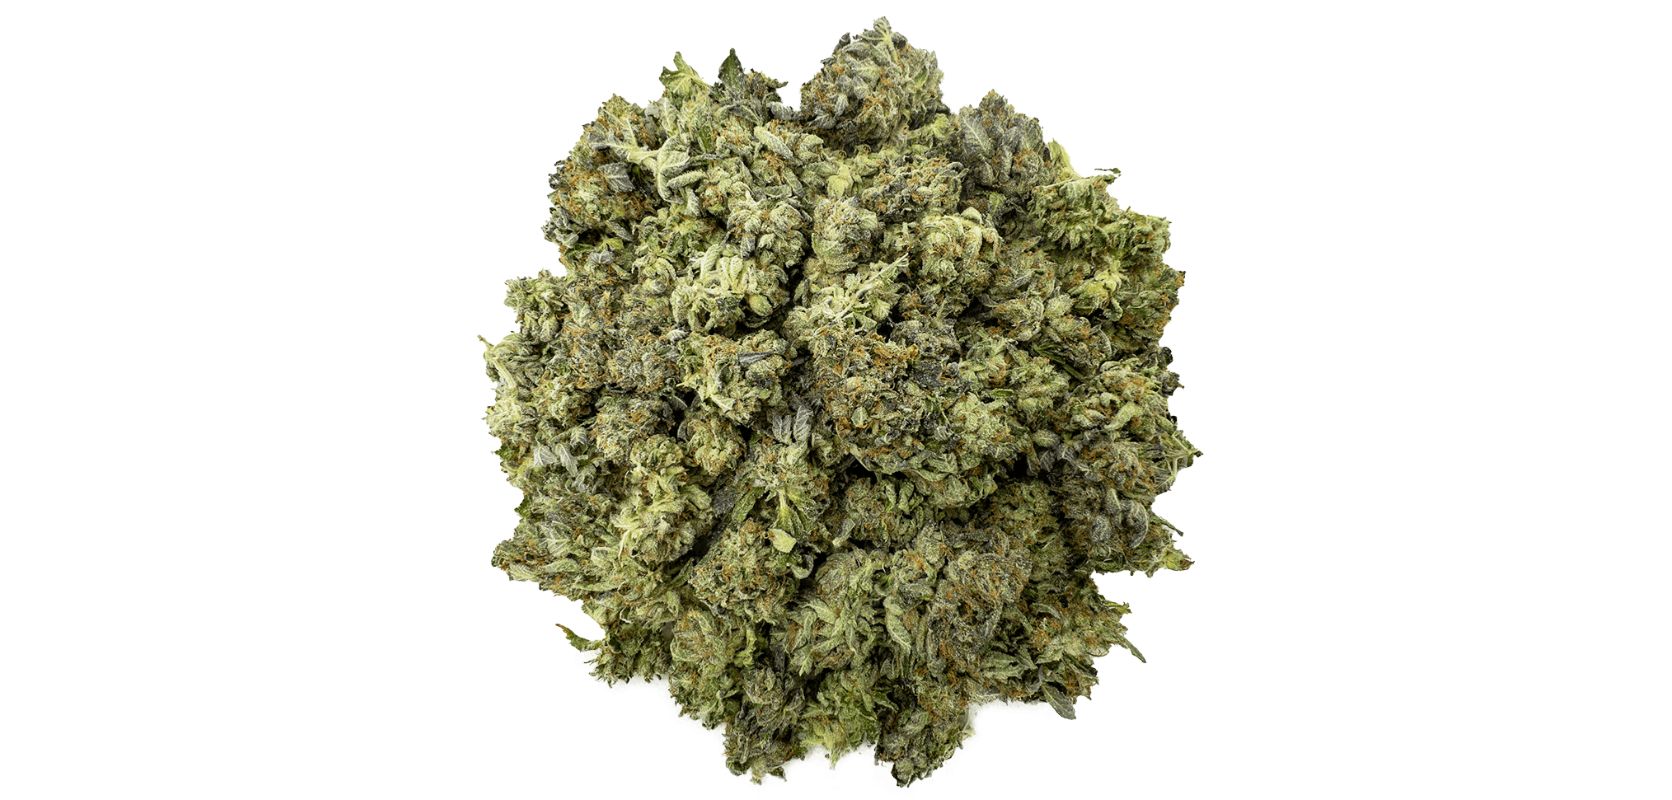 The Cali Bubba weed strain is known for its rich and diverse flavour profile, as well as its distinct aroma. 